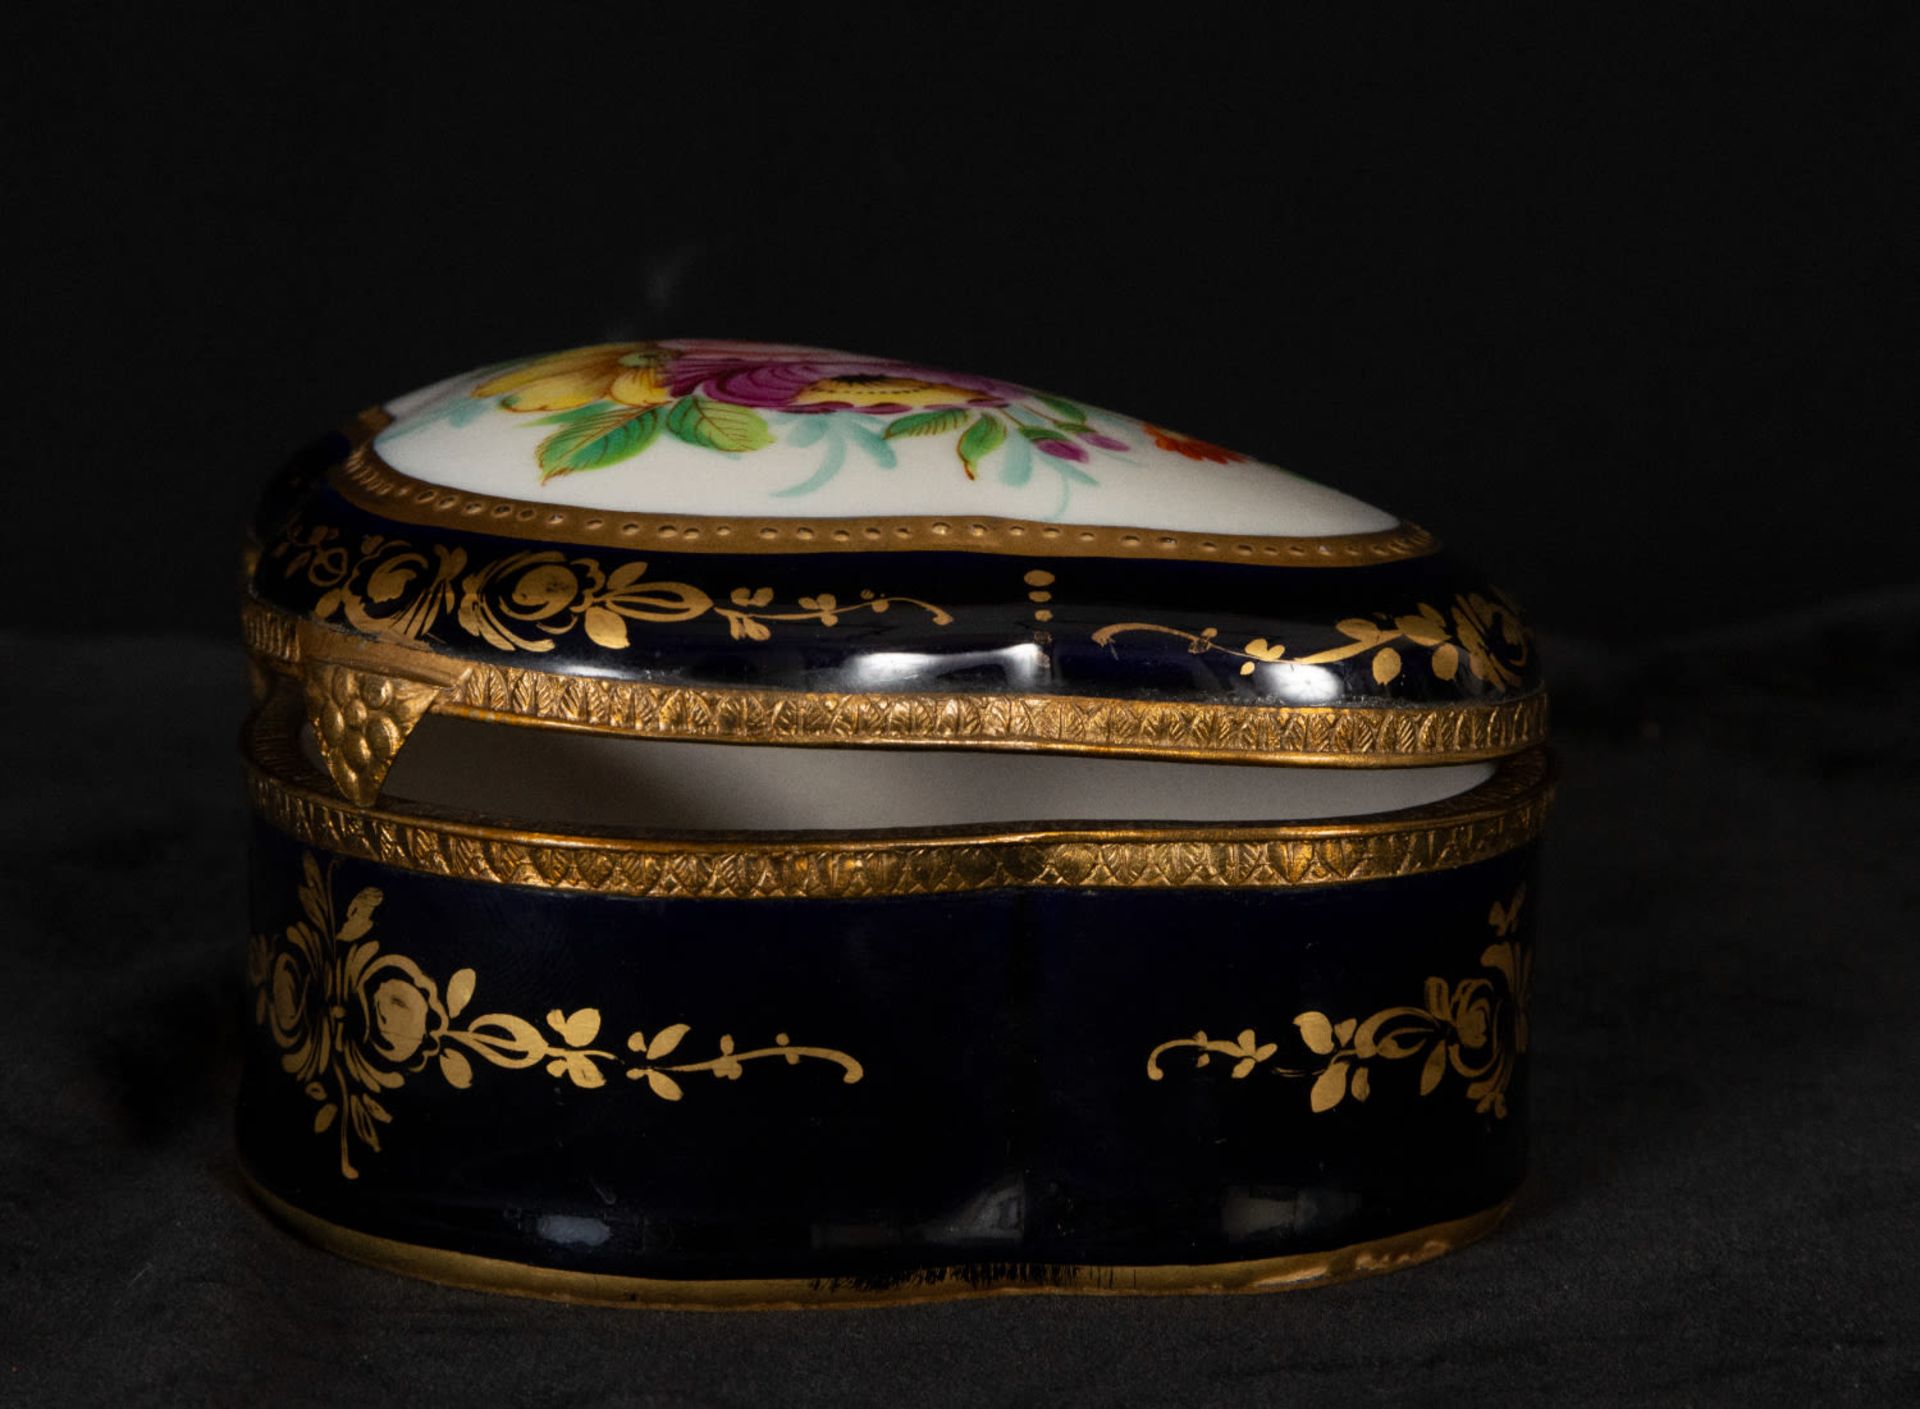 Pair of Sèvres porcelain dressing table jewelry boxes and porcelain swan, 19th century - Image 7 of 10